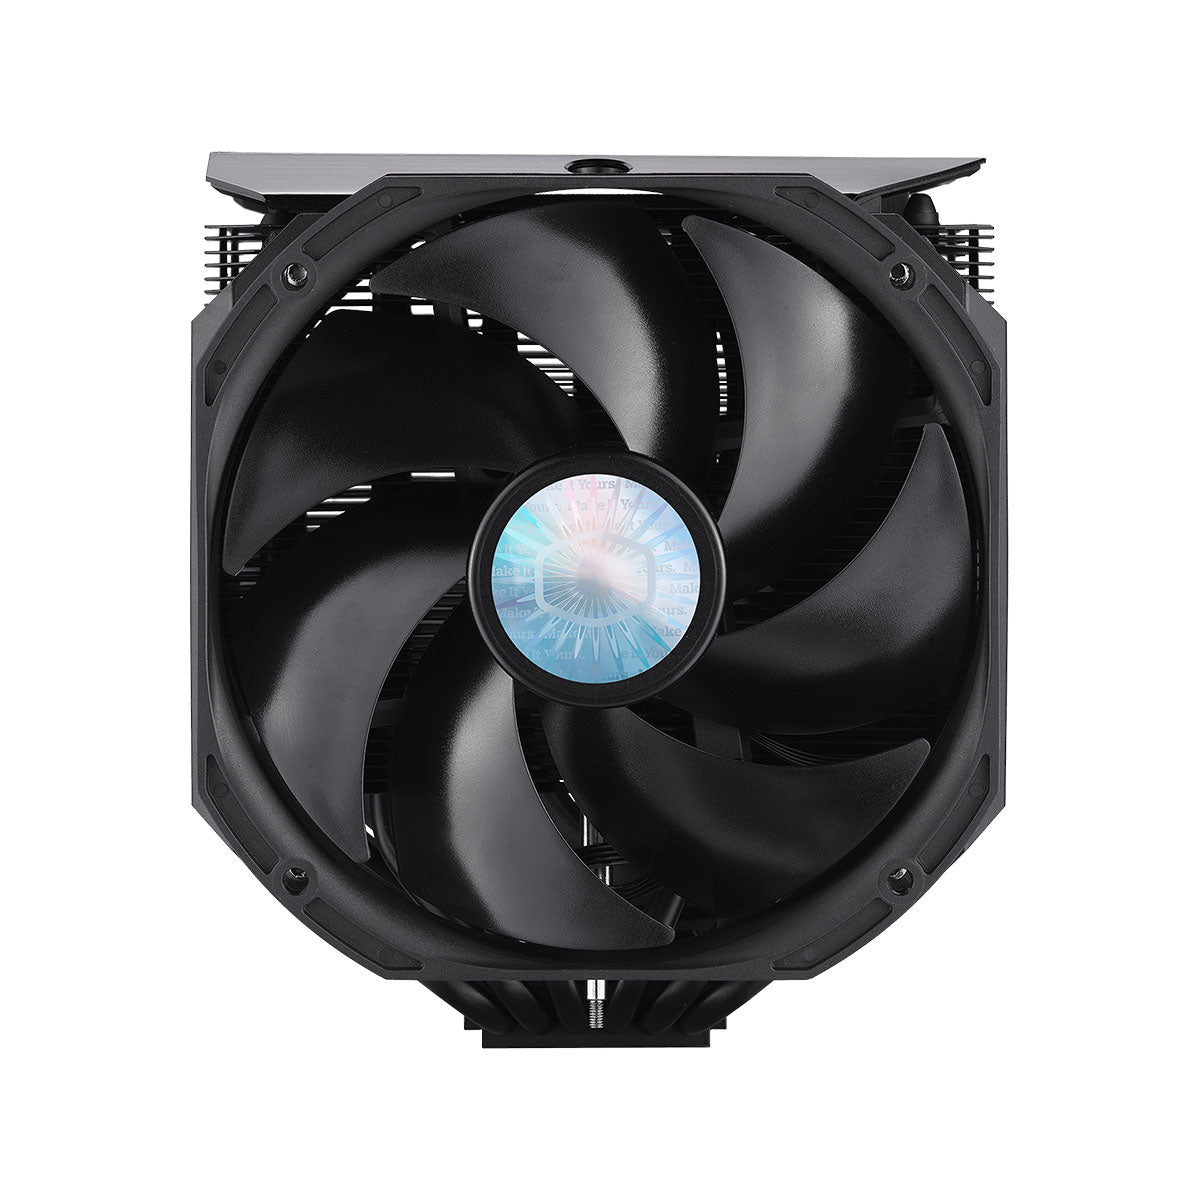 Cooler Master MasterAir MA624 Stealth CPU Air Cooler with Dual 140mm SickleFlow Fan and One 120mm Fan